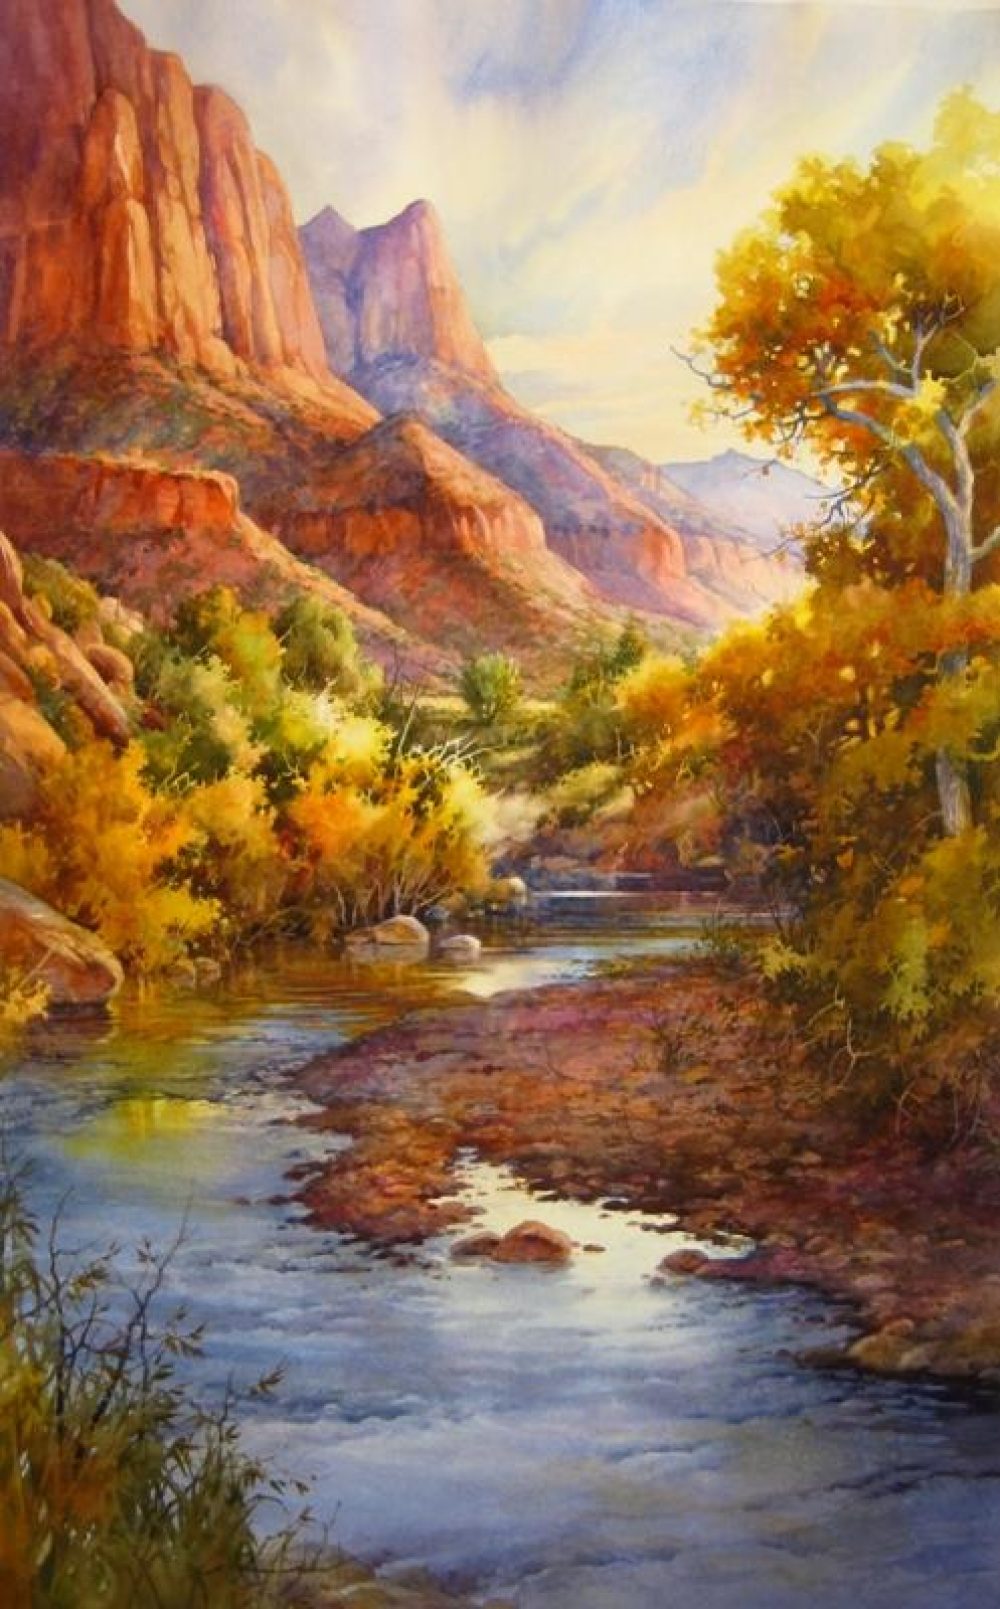 Virgin Beauty in Zion - Watercolor Painting of Virgin River in Zion National Park by Roland Lee